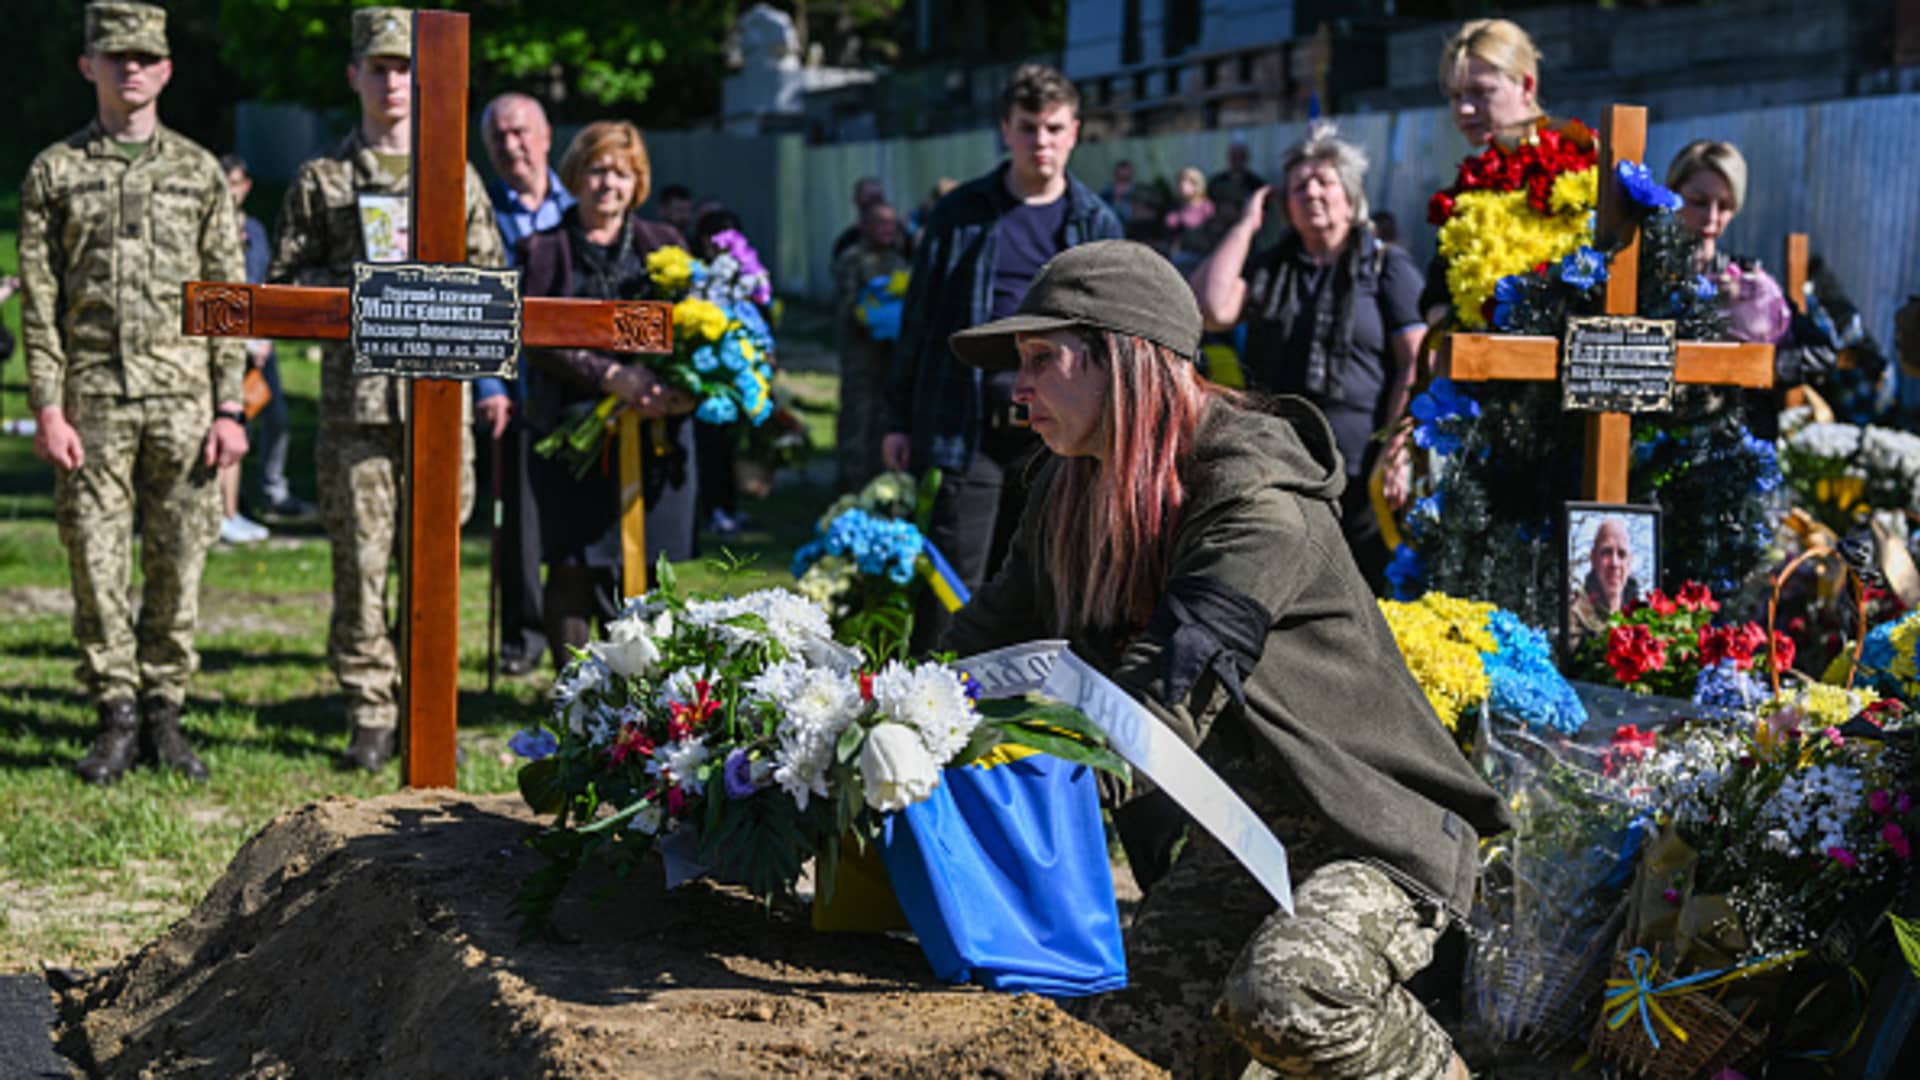 The wife of Olexandr Moisenko, age 42 who fell during the fights against Russia lays flowers on his grave at the Field of Mars of Lychakiv cemetery in Lviv, Ukraine on May 10, 2022.